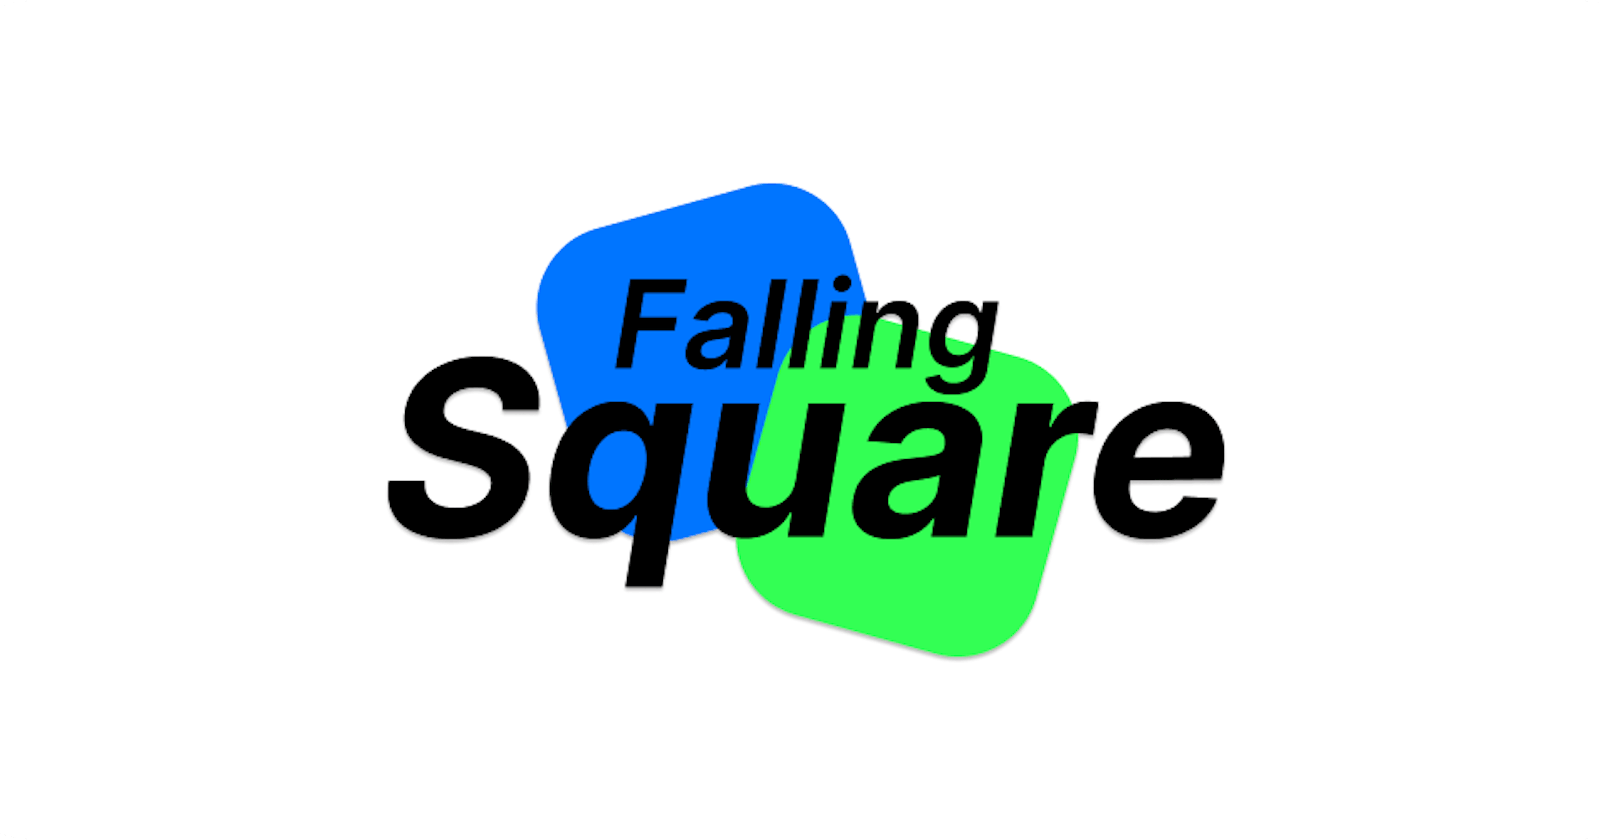 New leaderboard on my game Falling Square